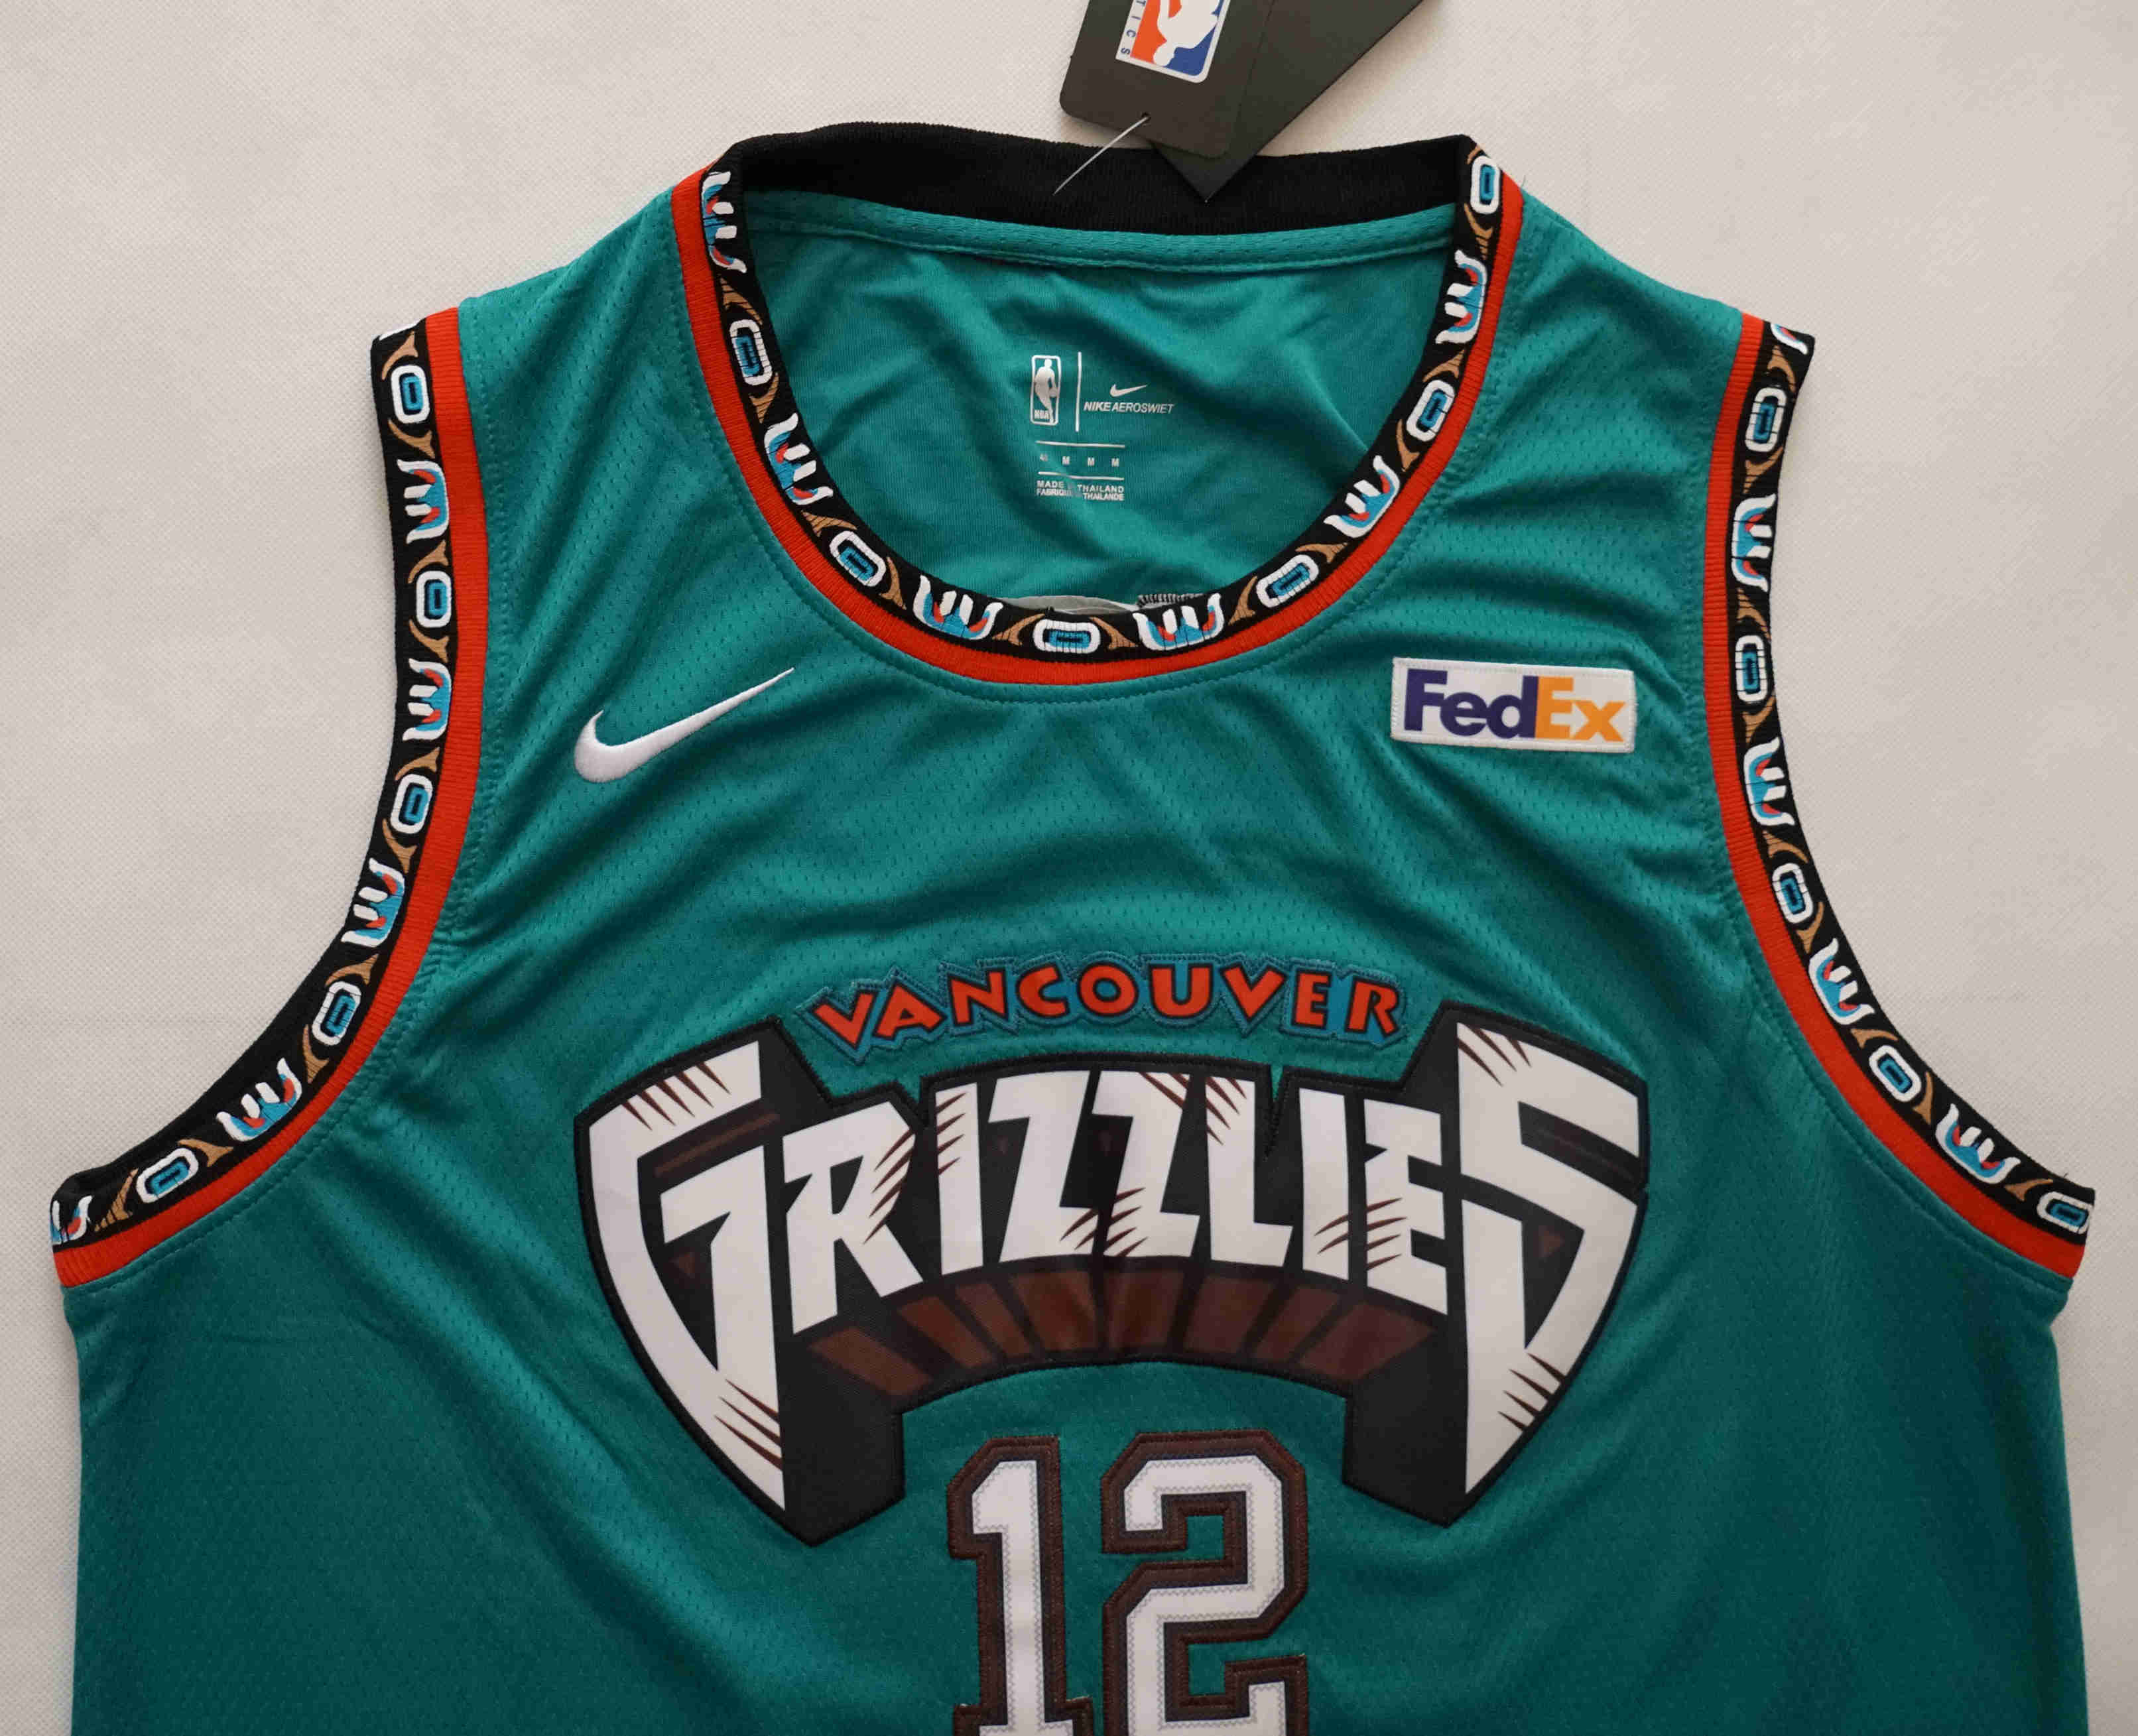 vancouver grizzlies home jersey